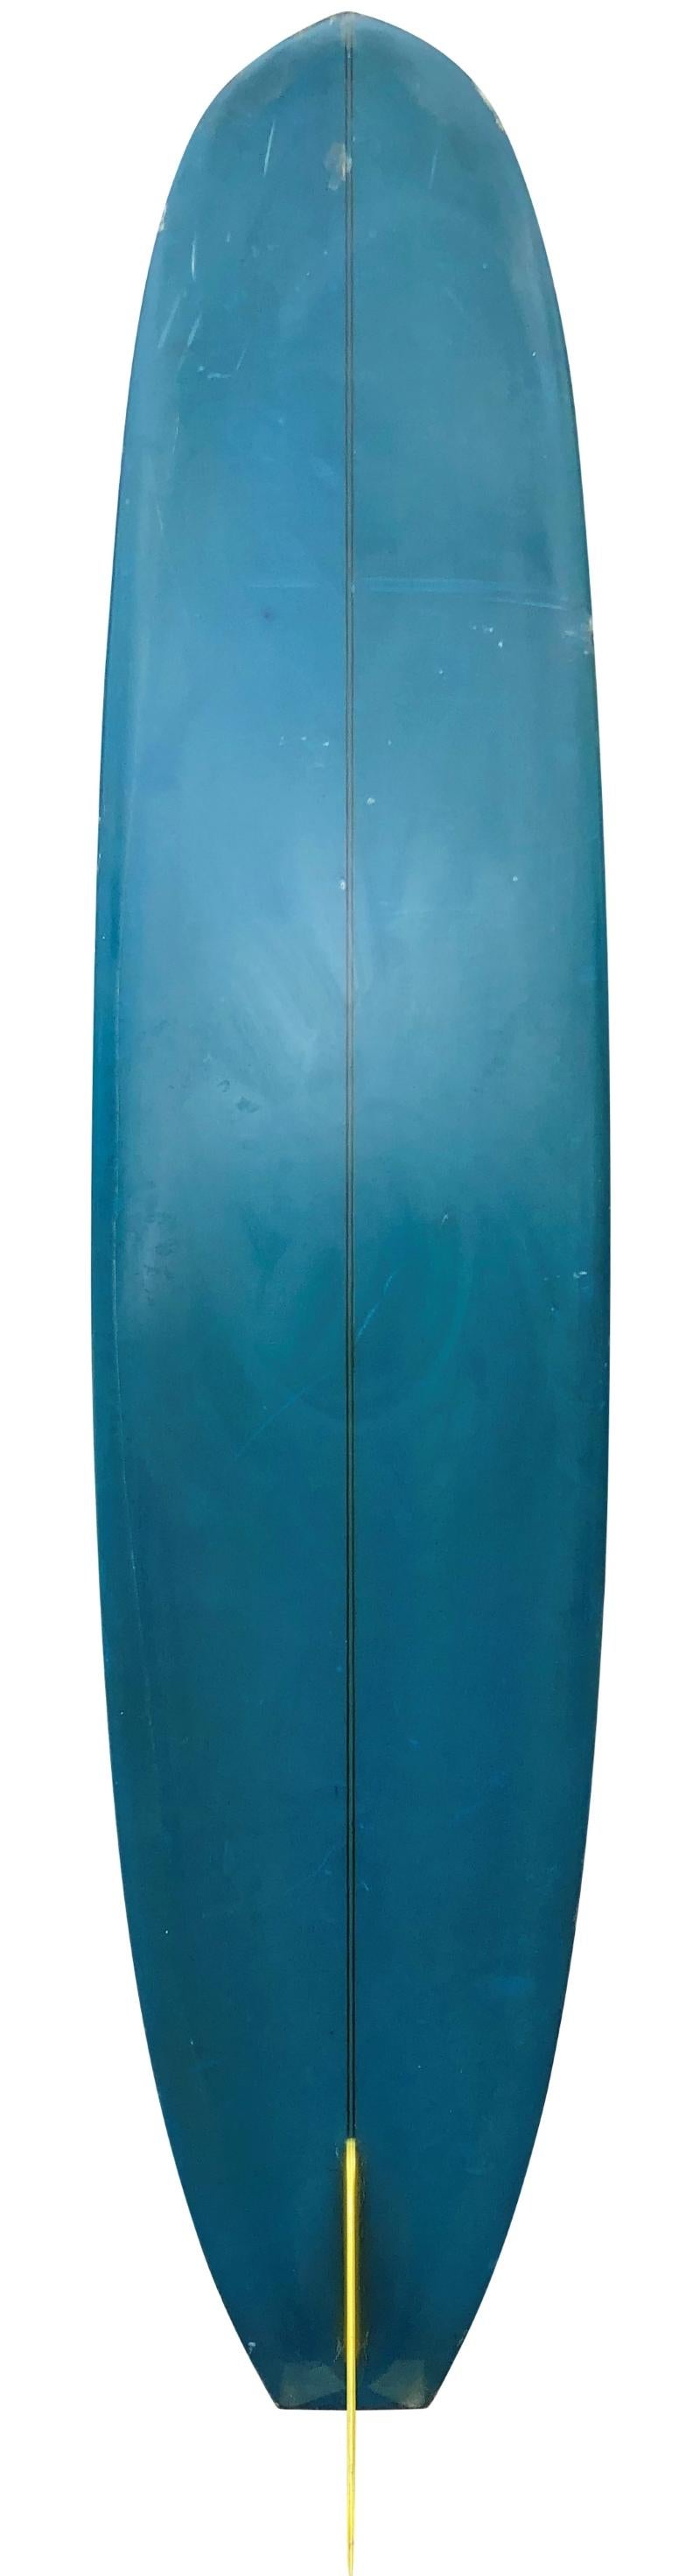 1967 Bing David Nuuhiwa light-weight model longboard shaped in 1967, serial #8375. Features a beautiful deep blue tinted bottom/wrapped rails with pinline, T band stringer, and glass-on single fin. A particularly short example of a Nuuhiwa